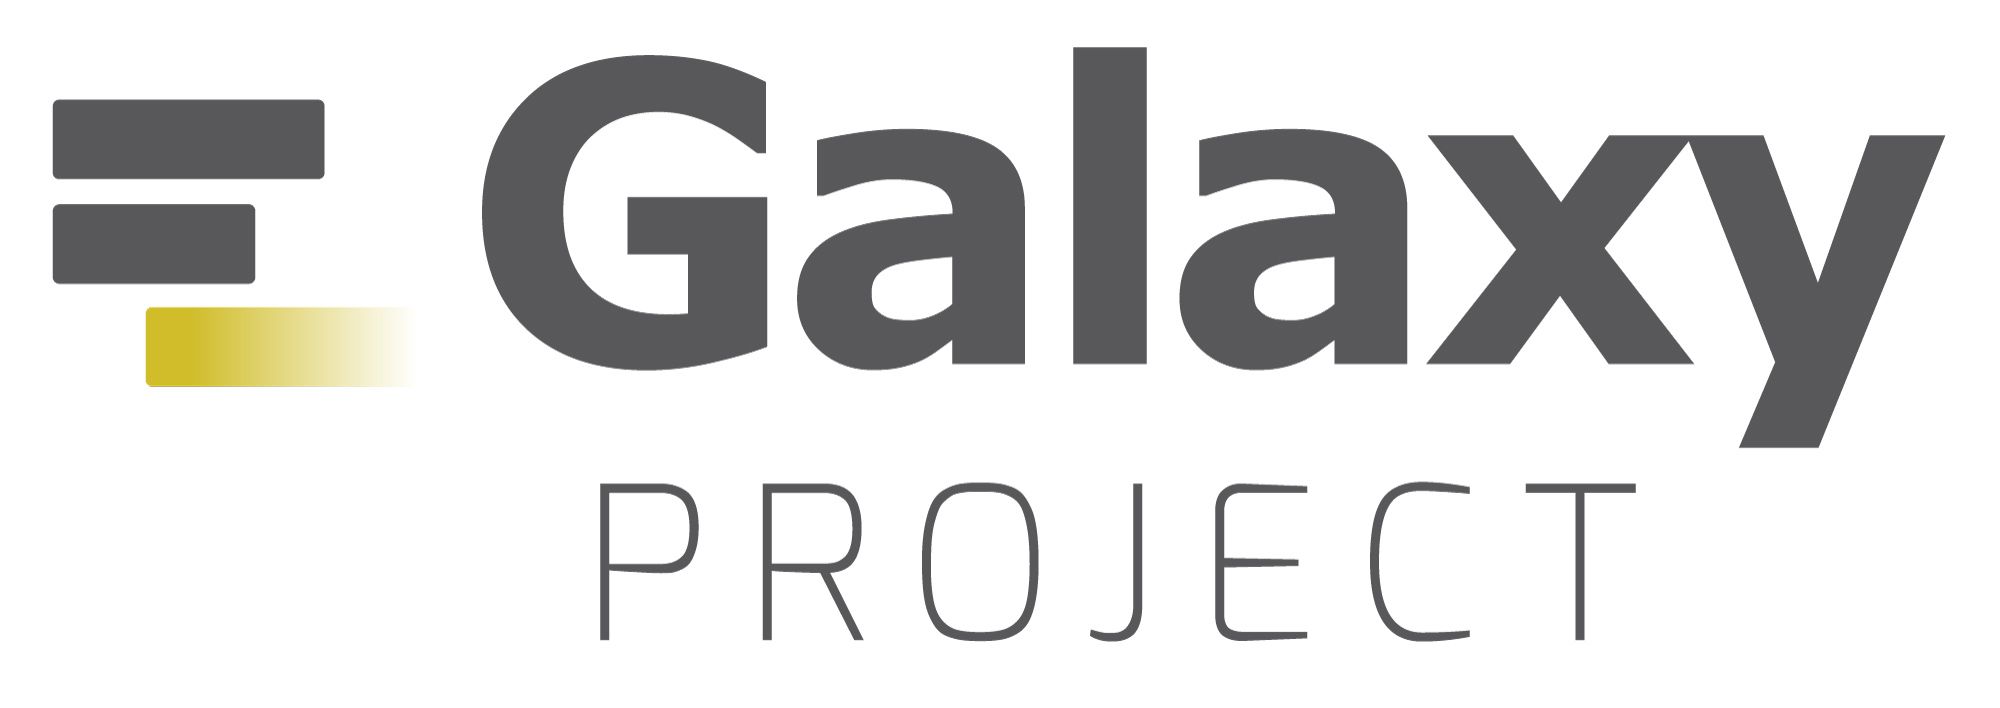 Galaxy Project Logo, white background